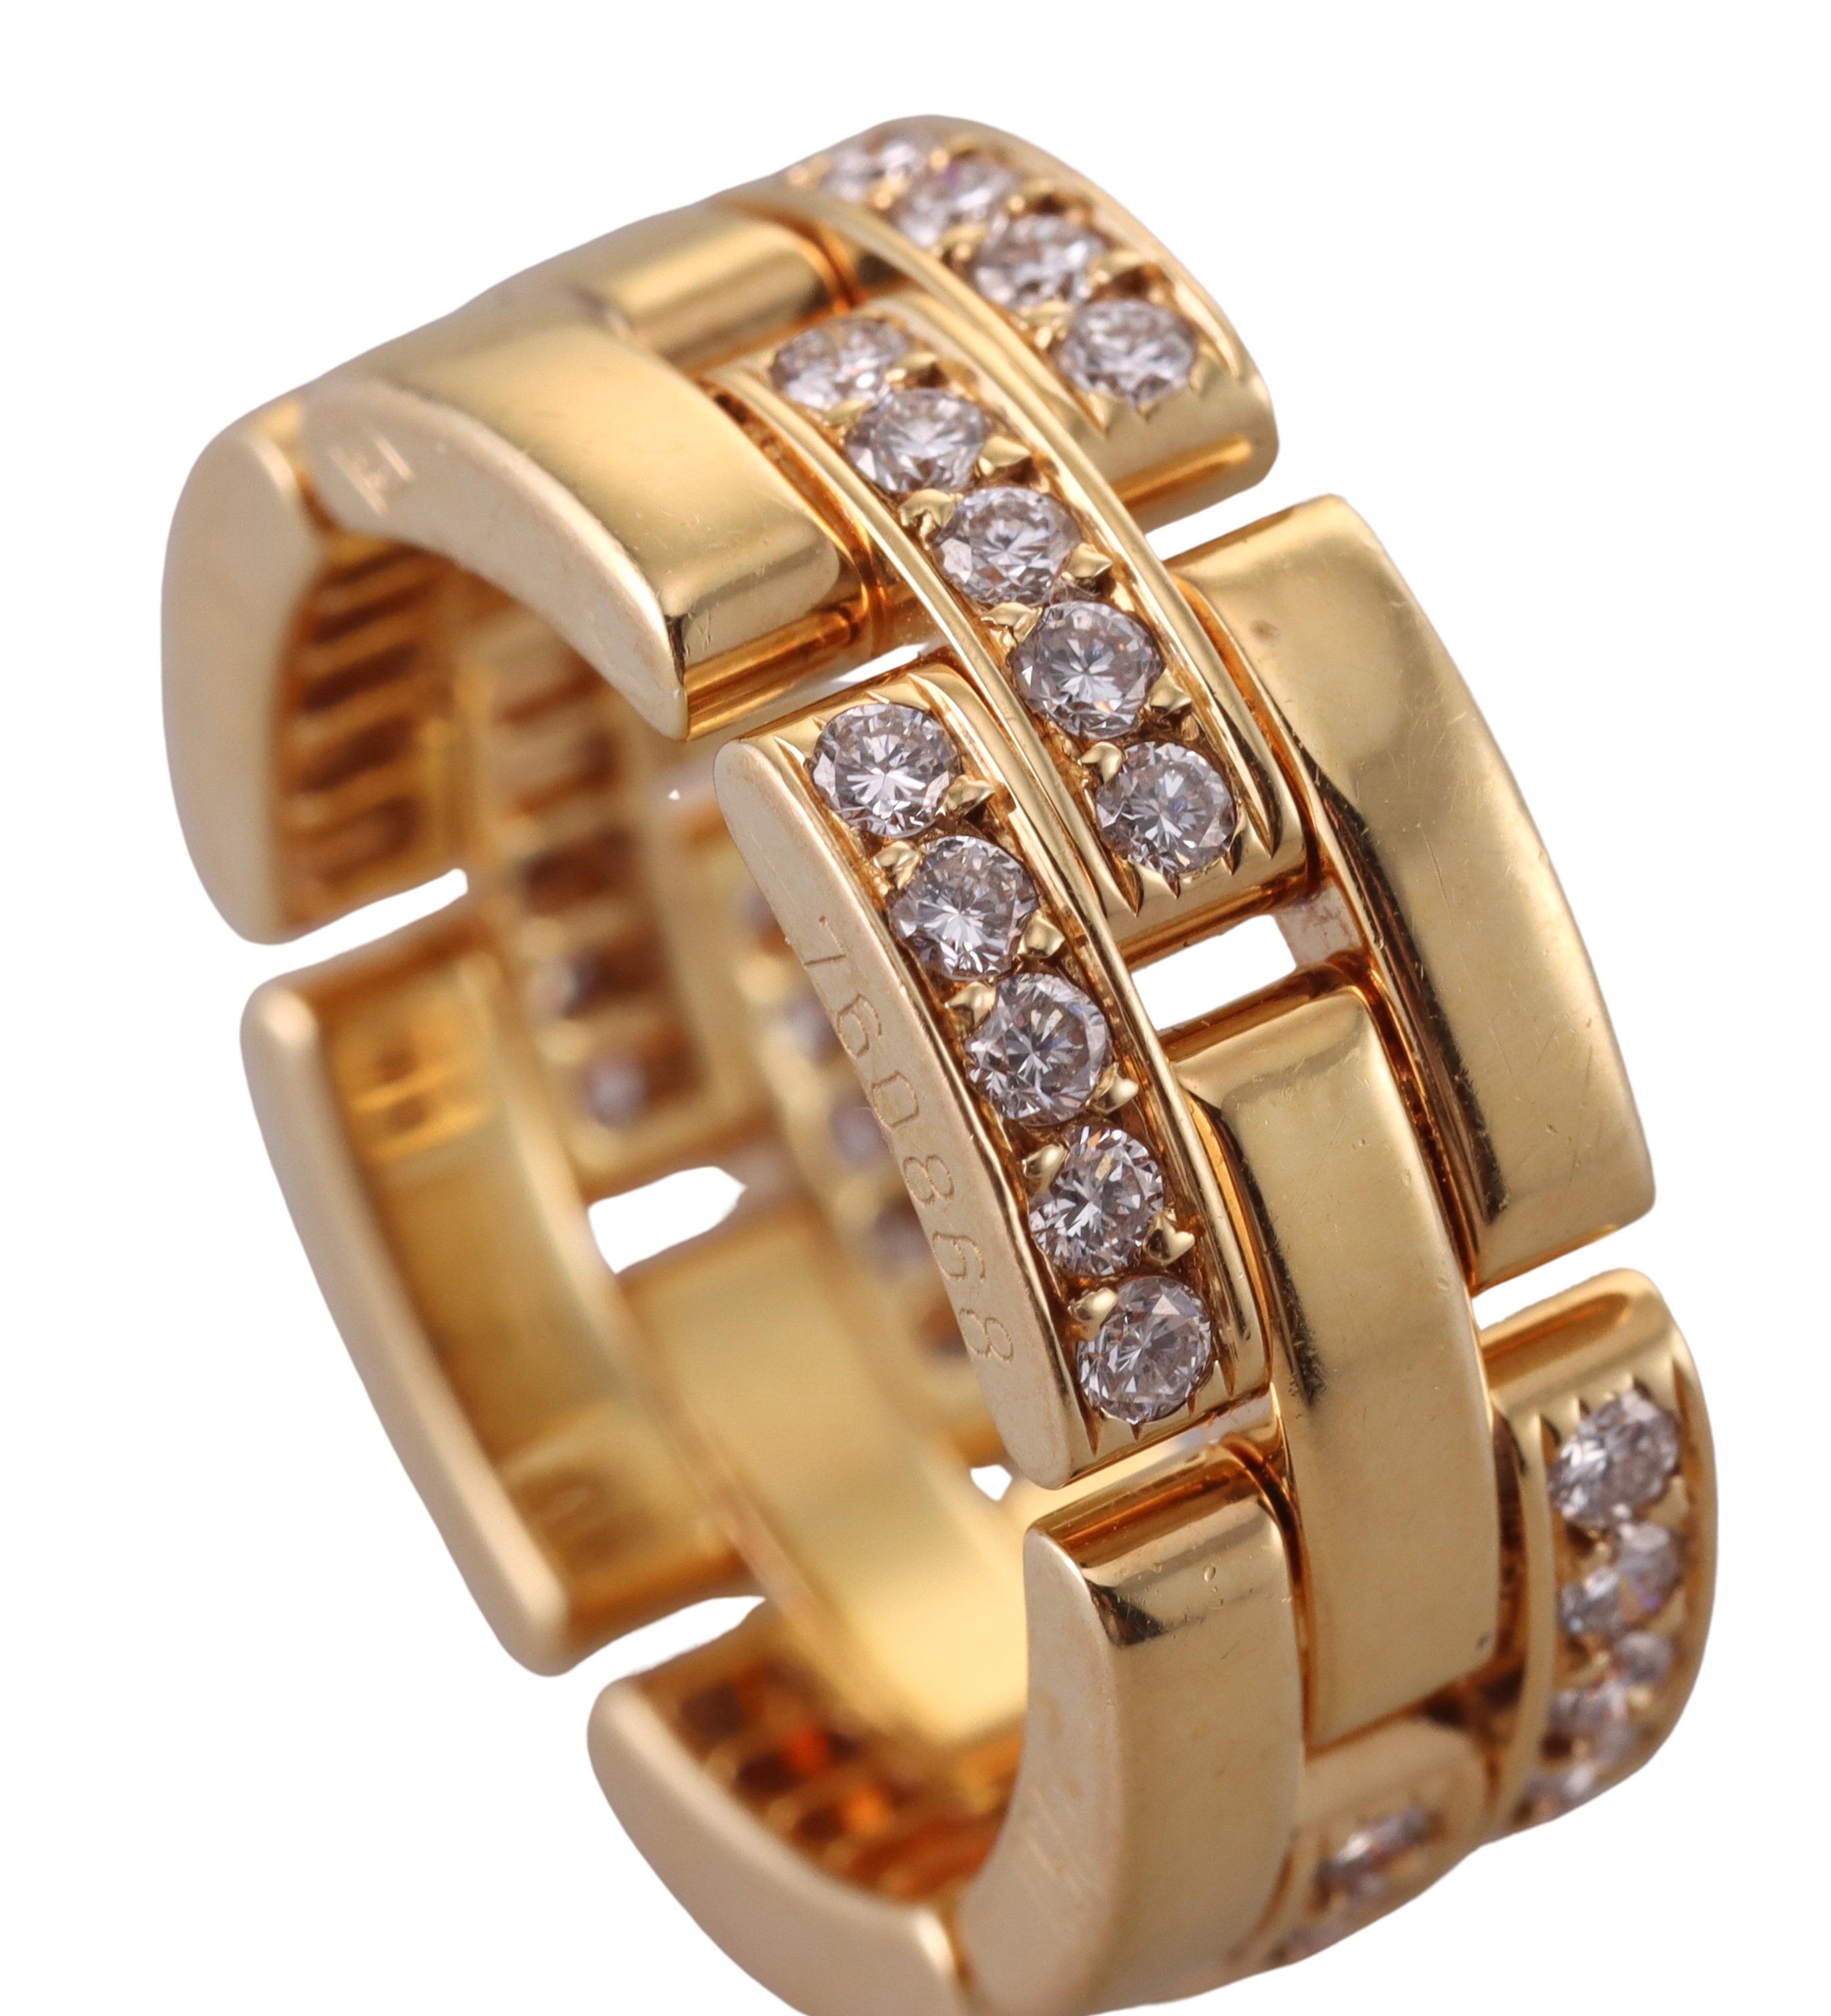 Cartier Maillon Panthere Gold Diamond Band Ring In Excellent Condition For Sale In New York, NY